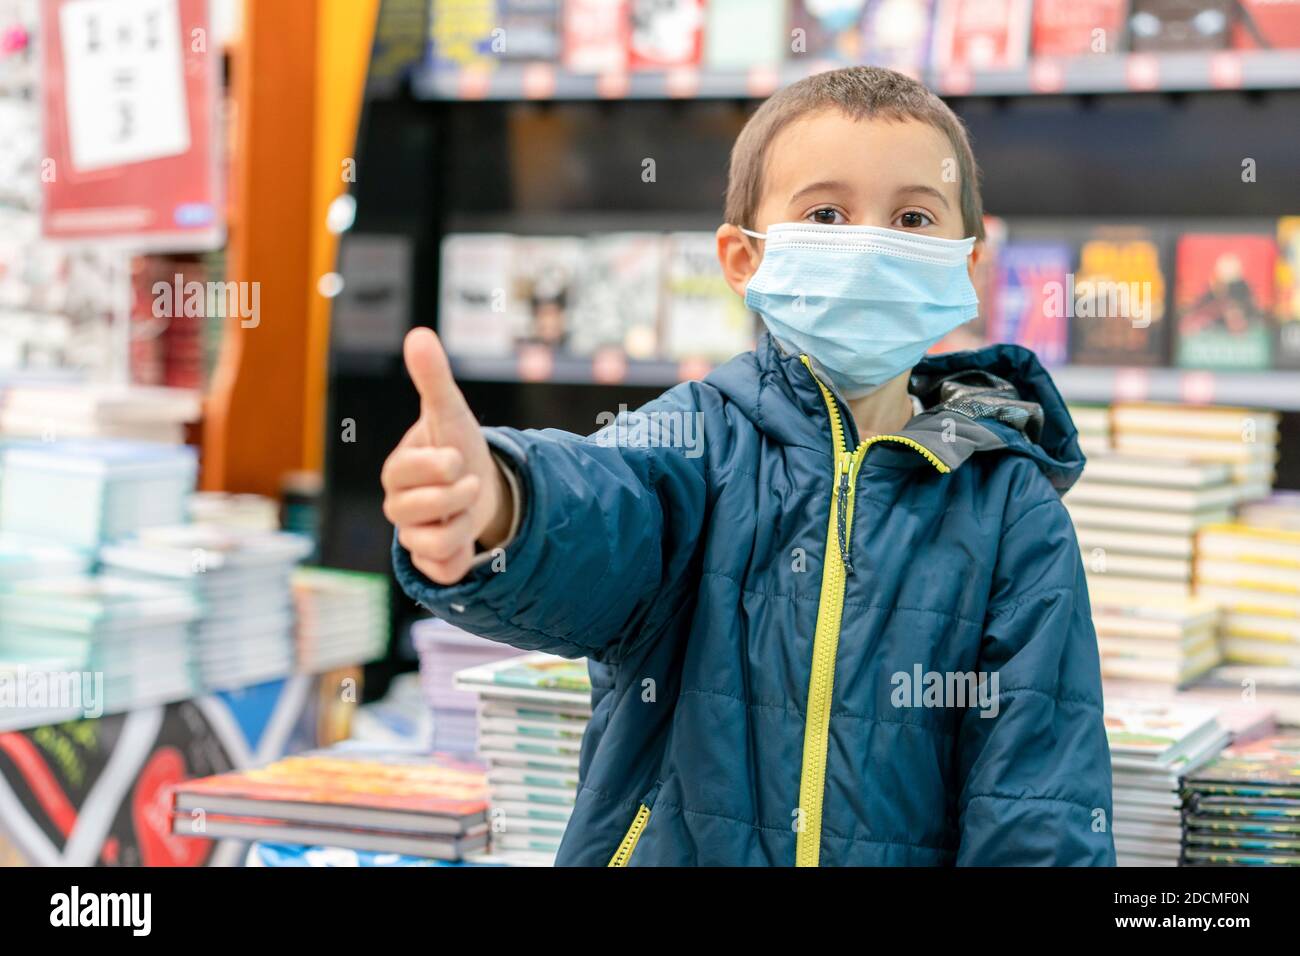 Boy in medical mask at bookstore. young boy chooses books in a bookshop. boy wear a protective mask In a bookstore. Concept of life And protect Stock Photo